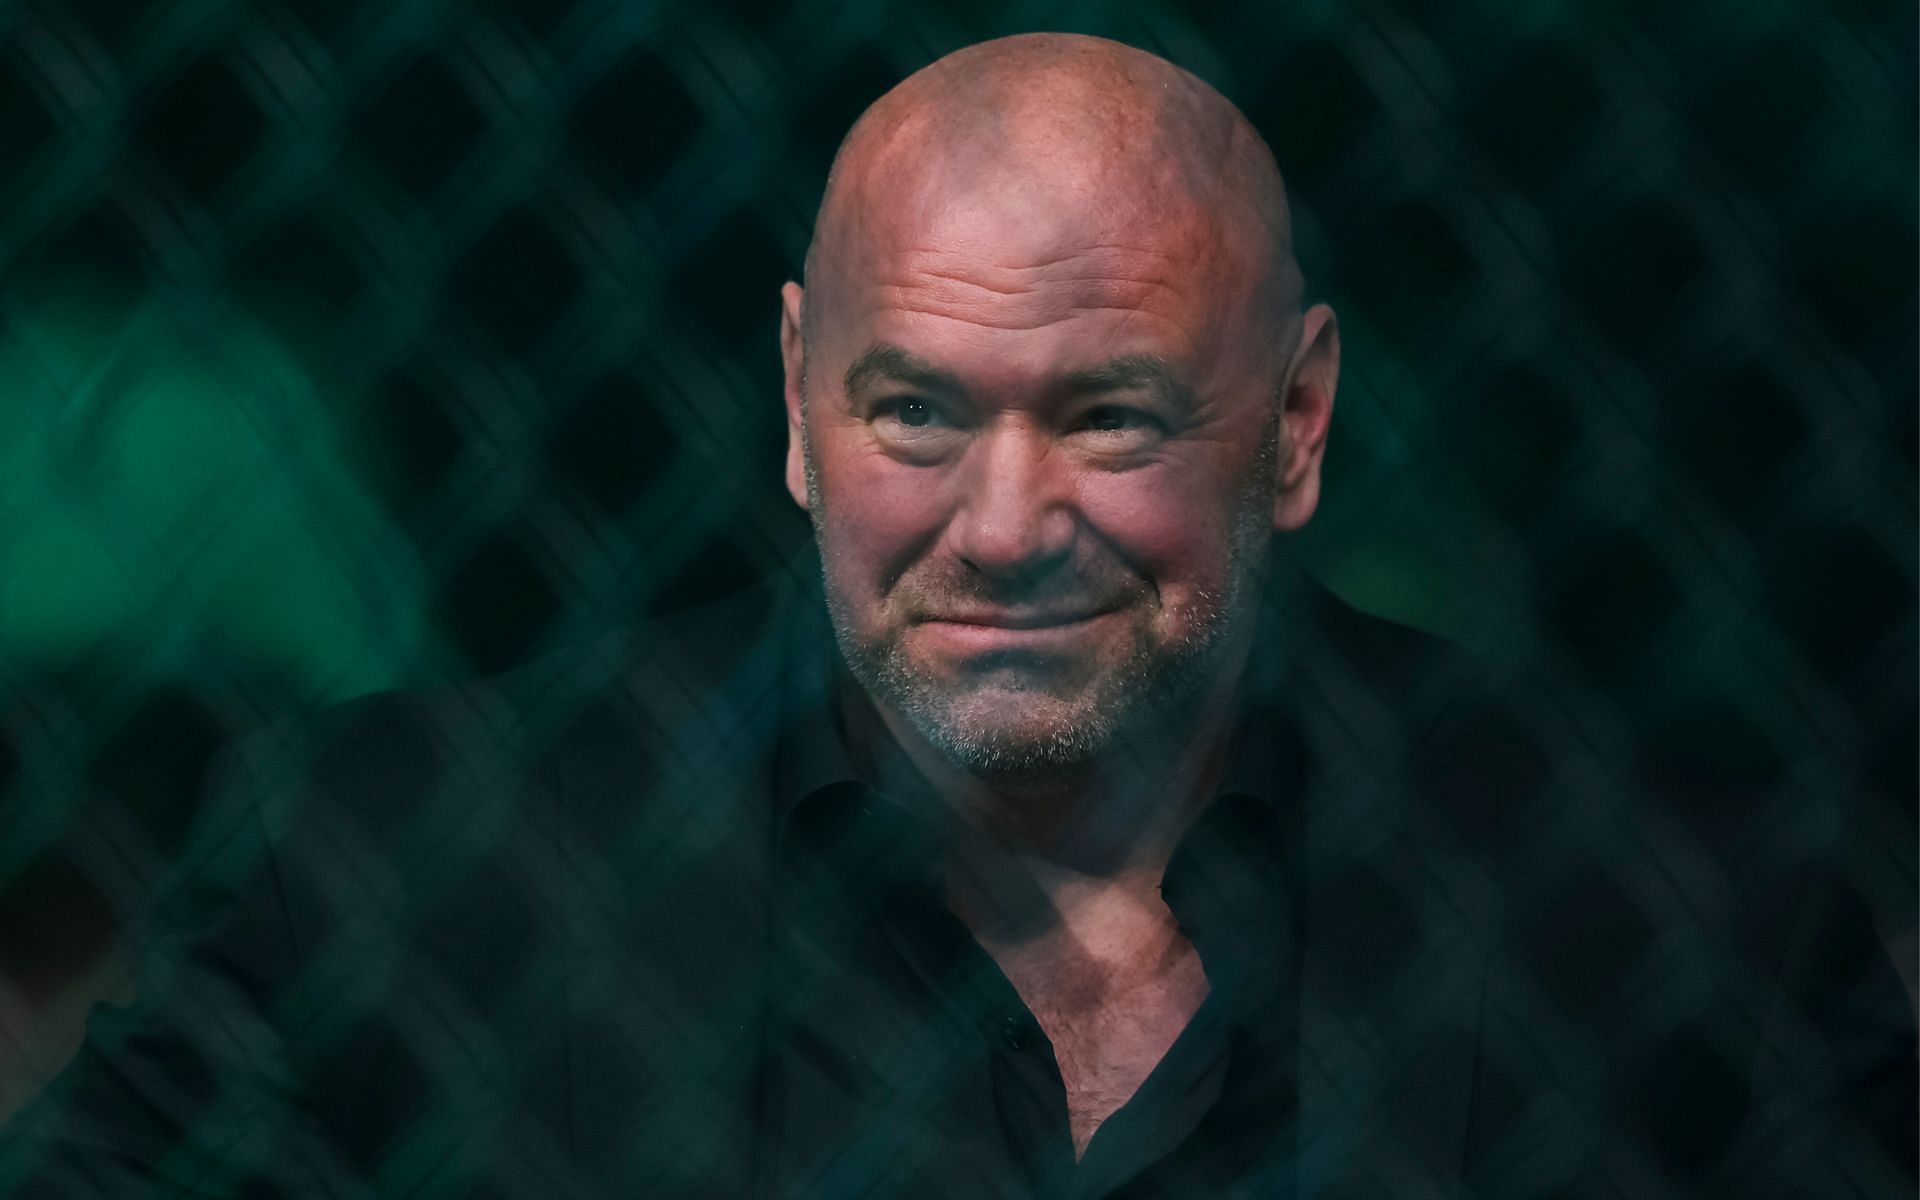 Dana White has been an integral part of the UFC, joining as its president in 2001 and being promoted to the CEO position in 2023 [Image courtesy: Getty Images]